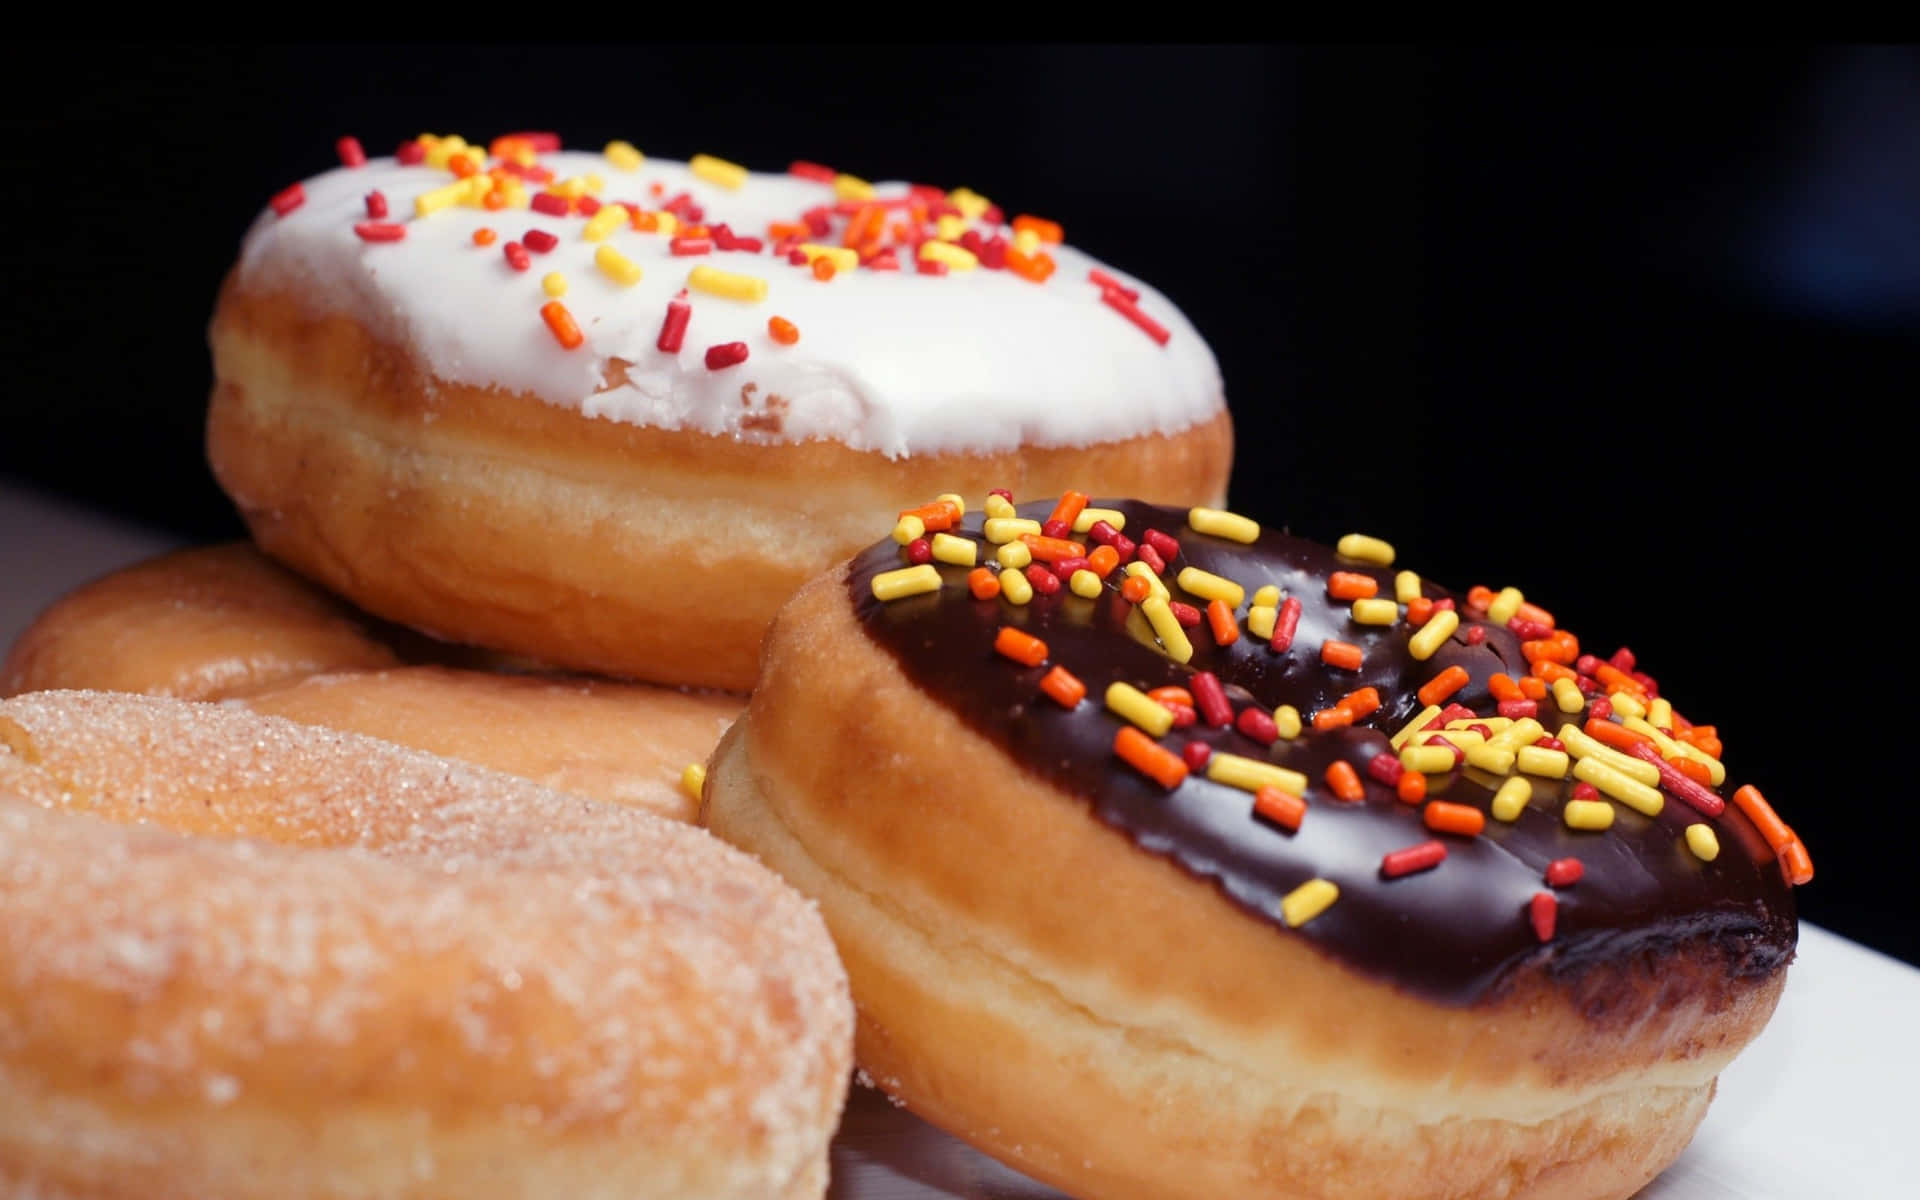 Treat yourself to delicious donuts!